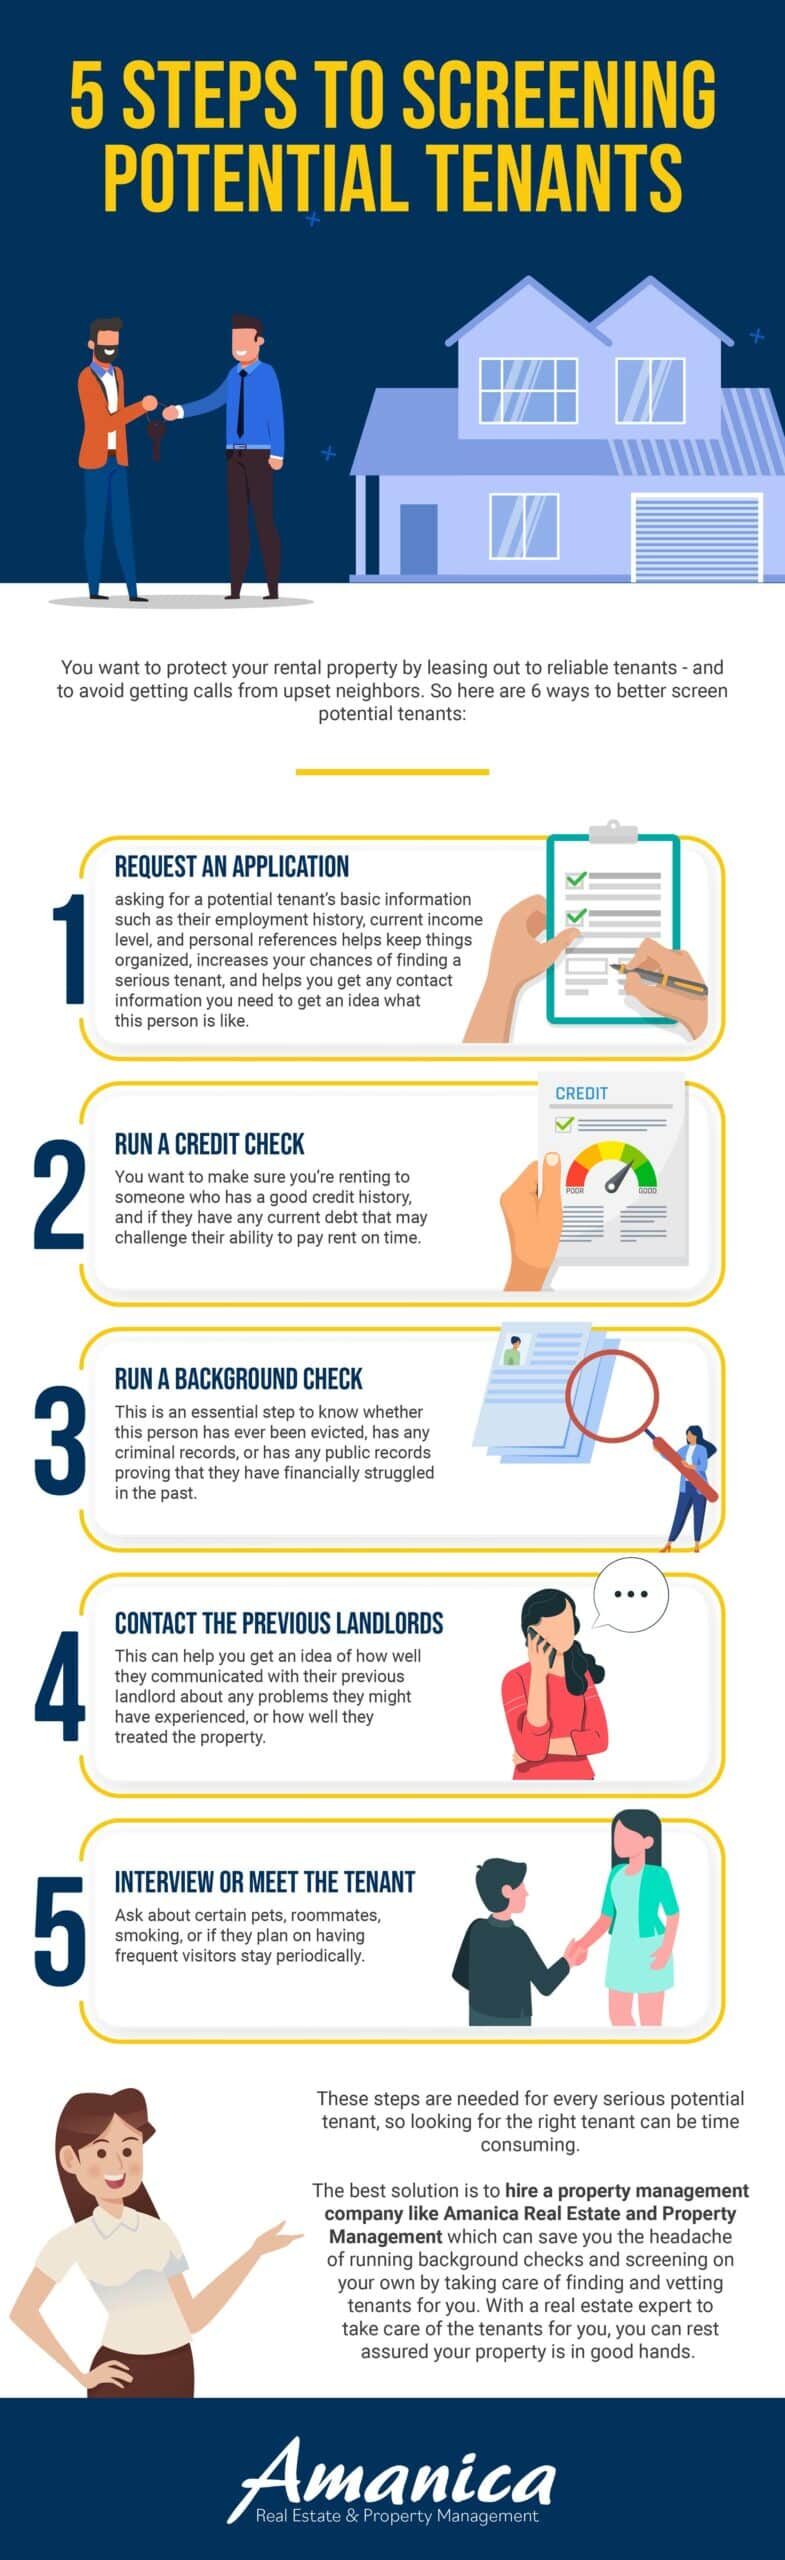 5 Steps to Screening Potential Tenants Infographic